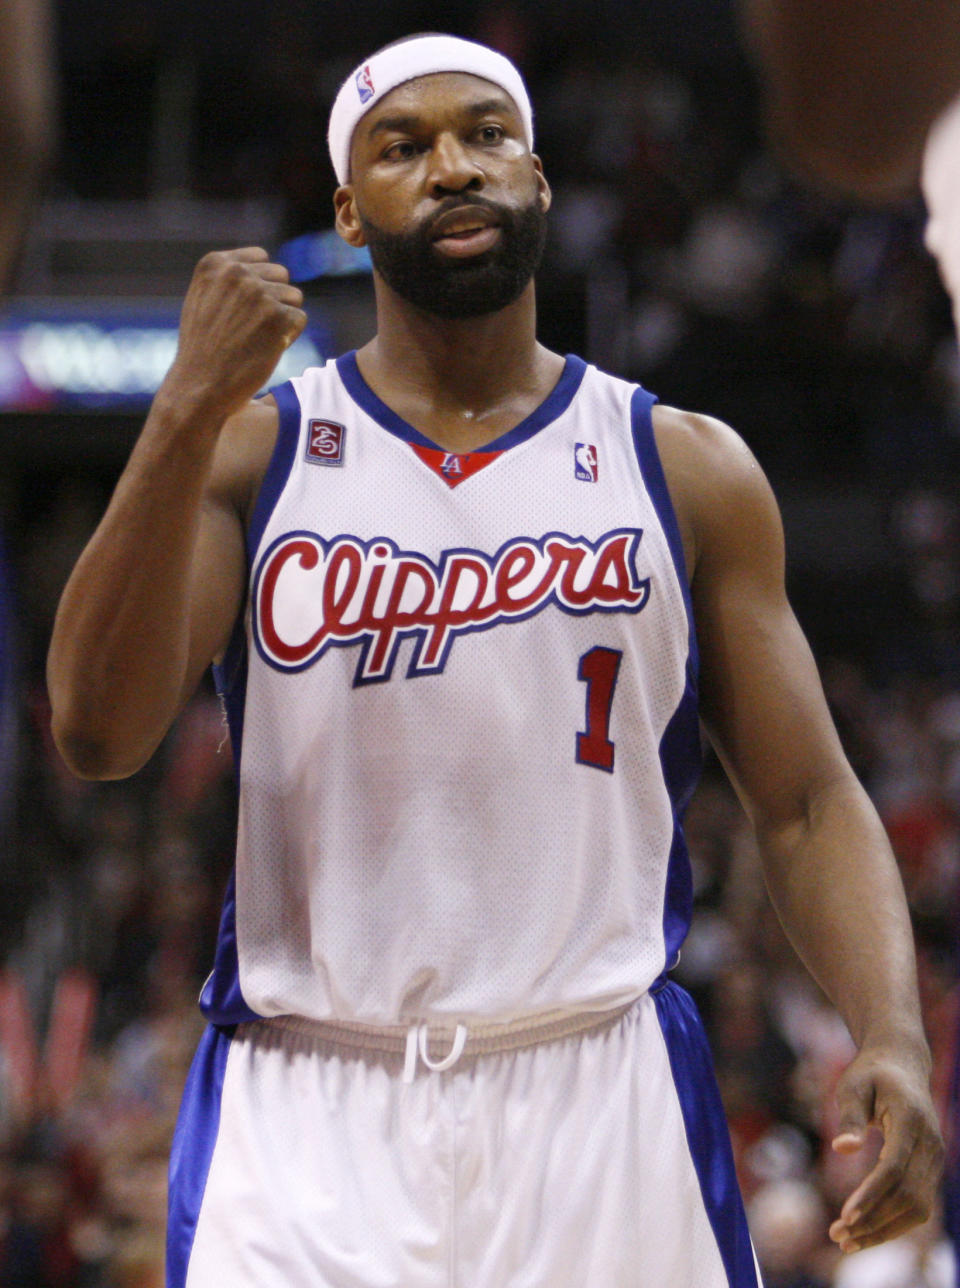 Baron Davis makes a celebratory fist during a Clippers game.